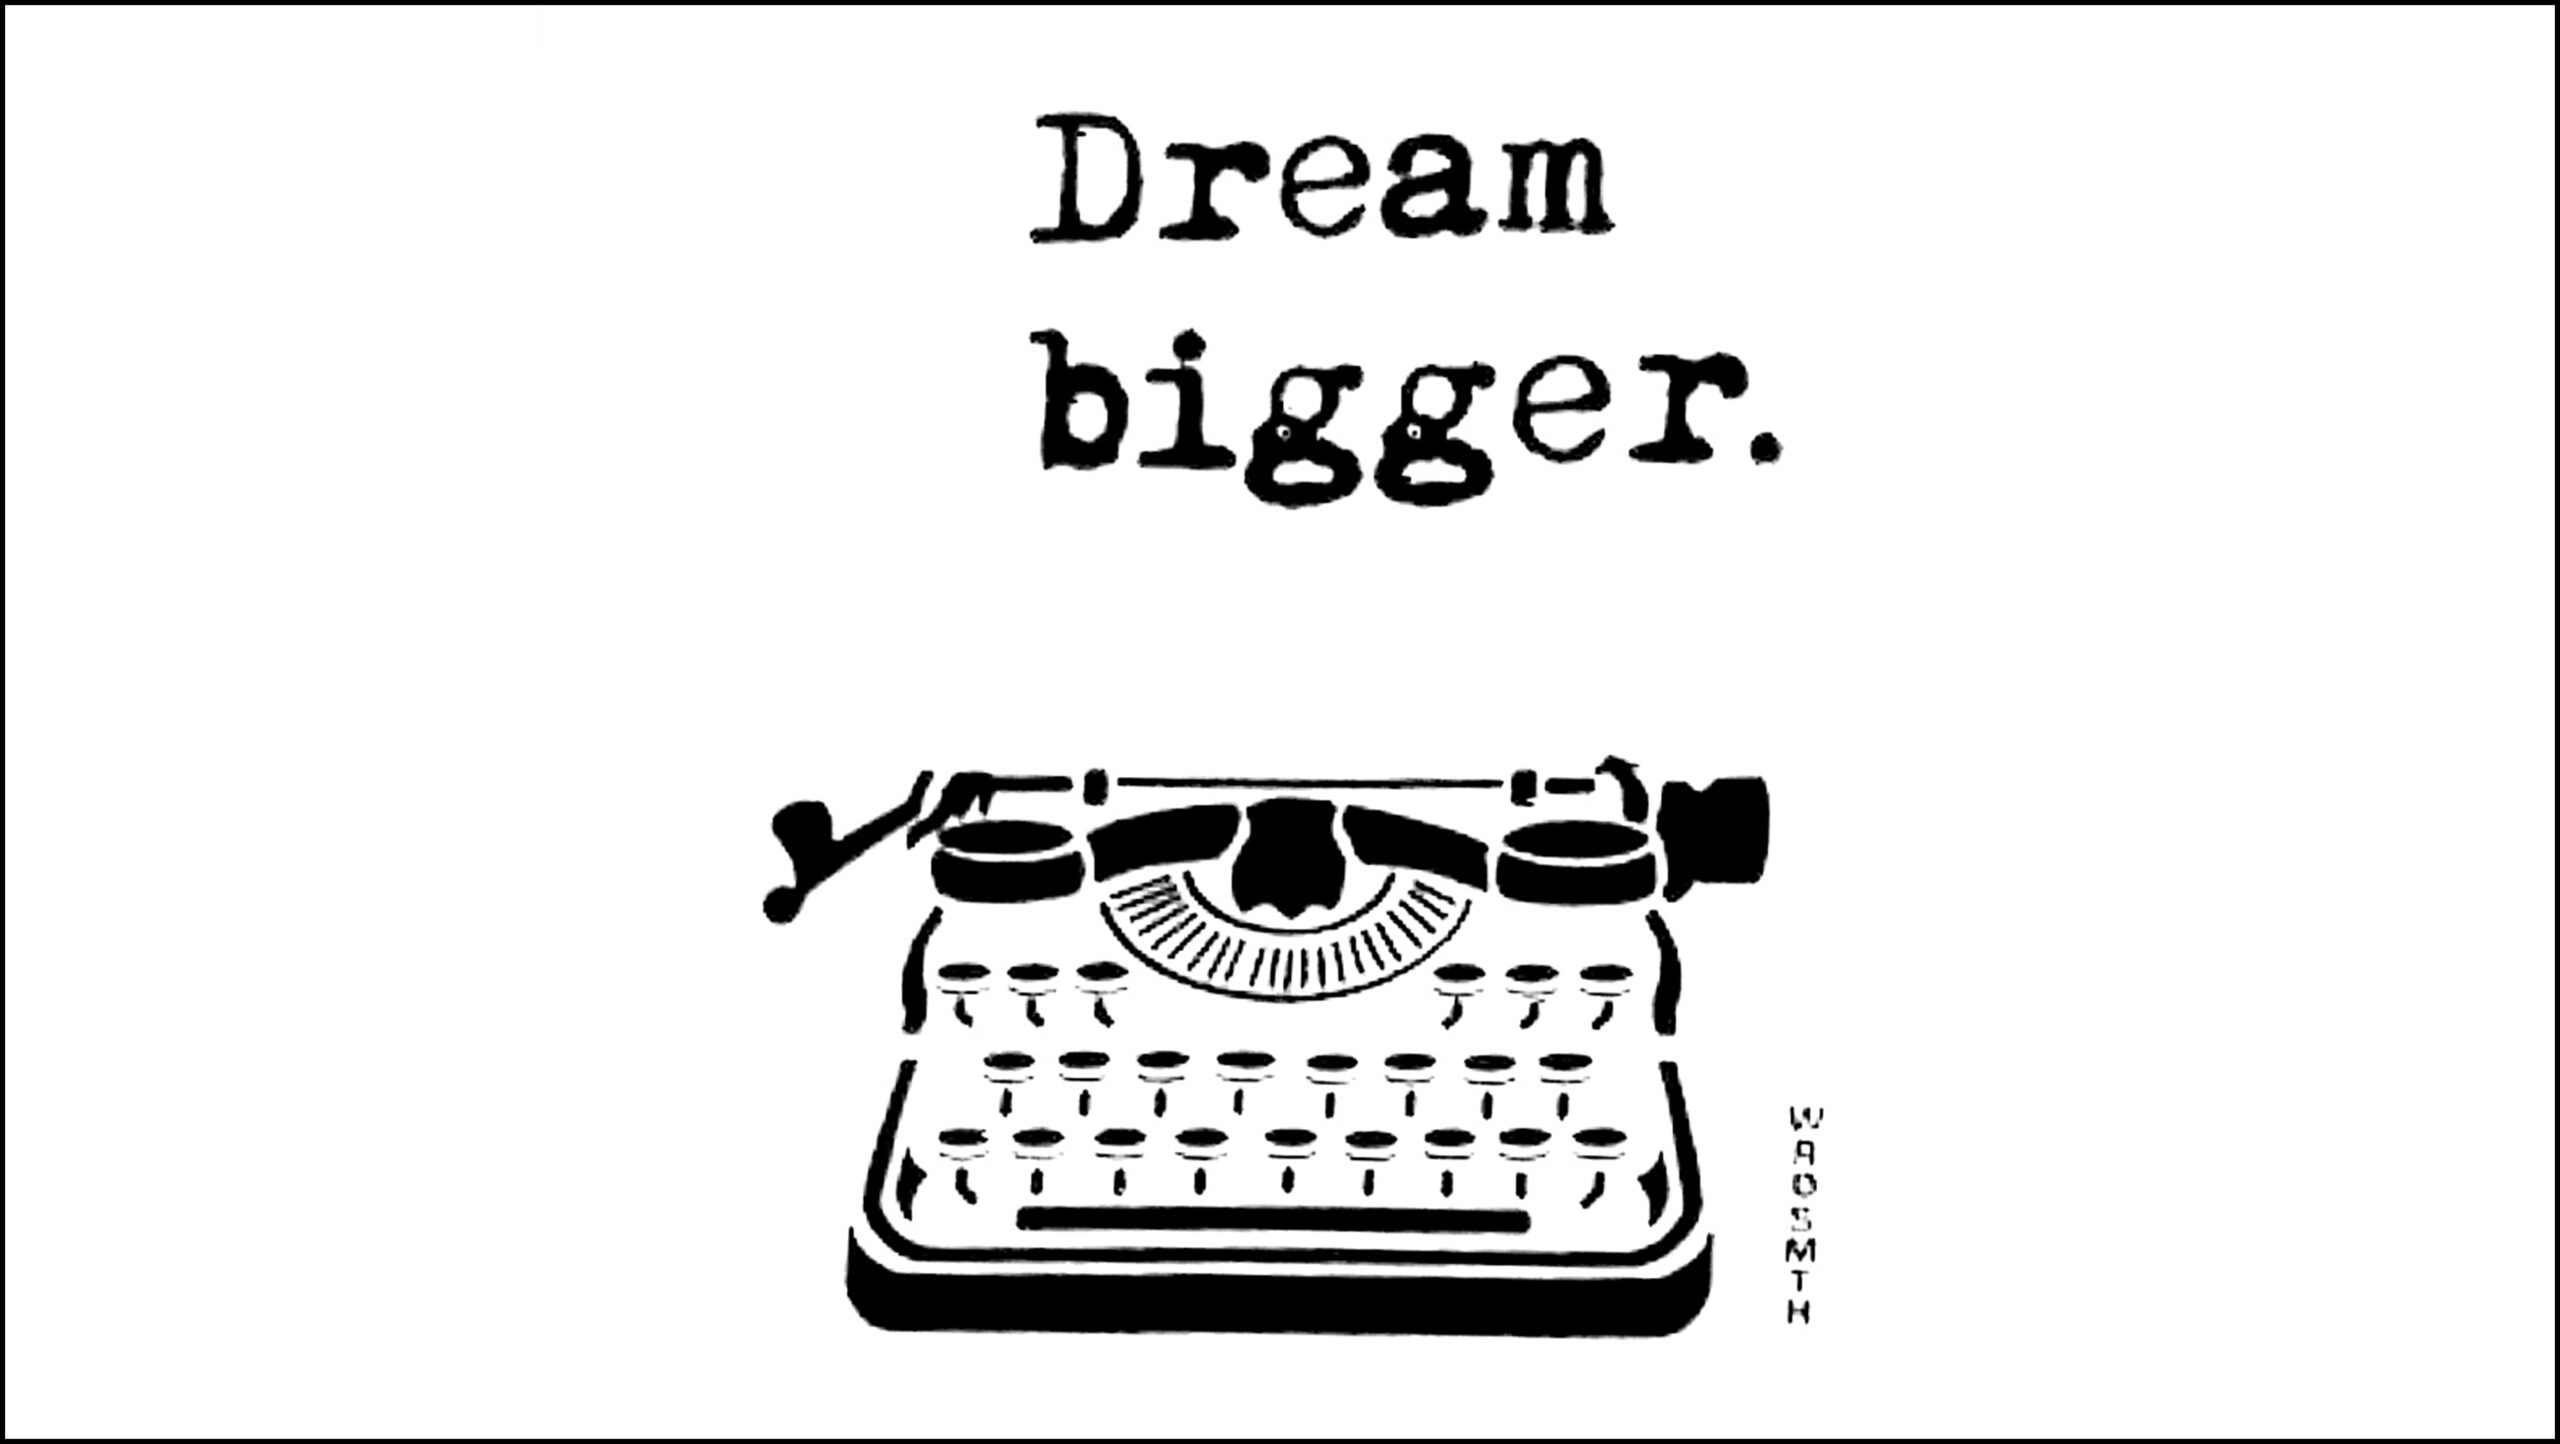 Line-drawing of an old typewriter. Above it are the words "Dream bigger."